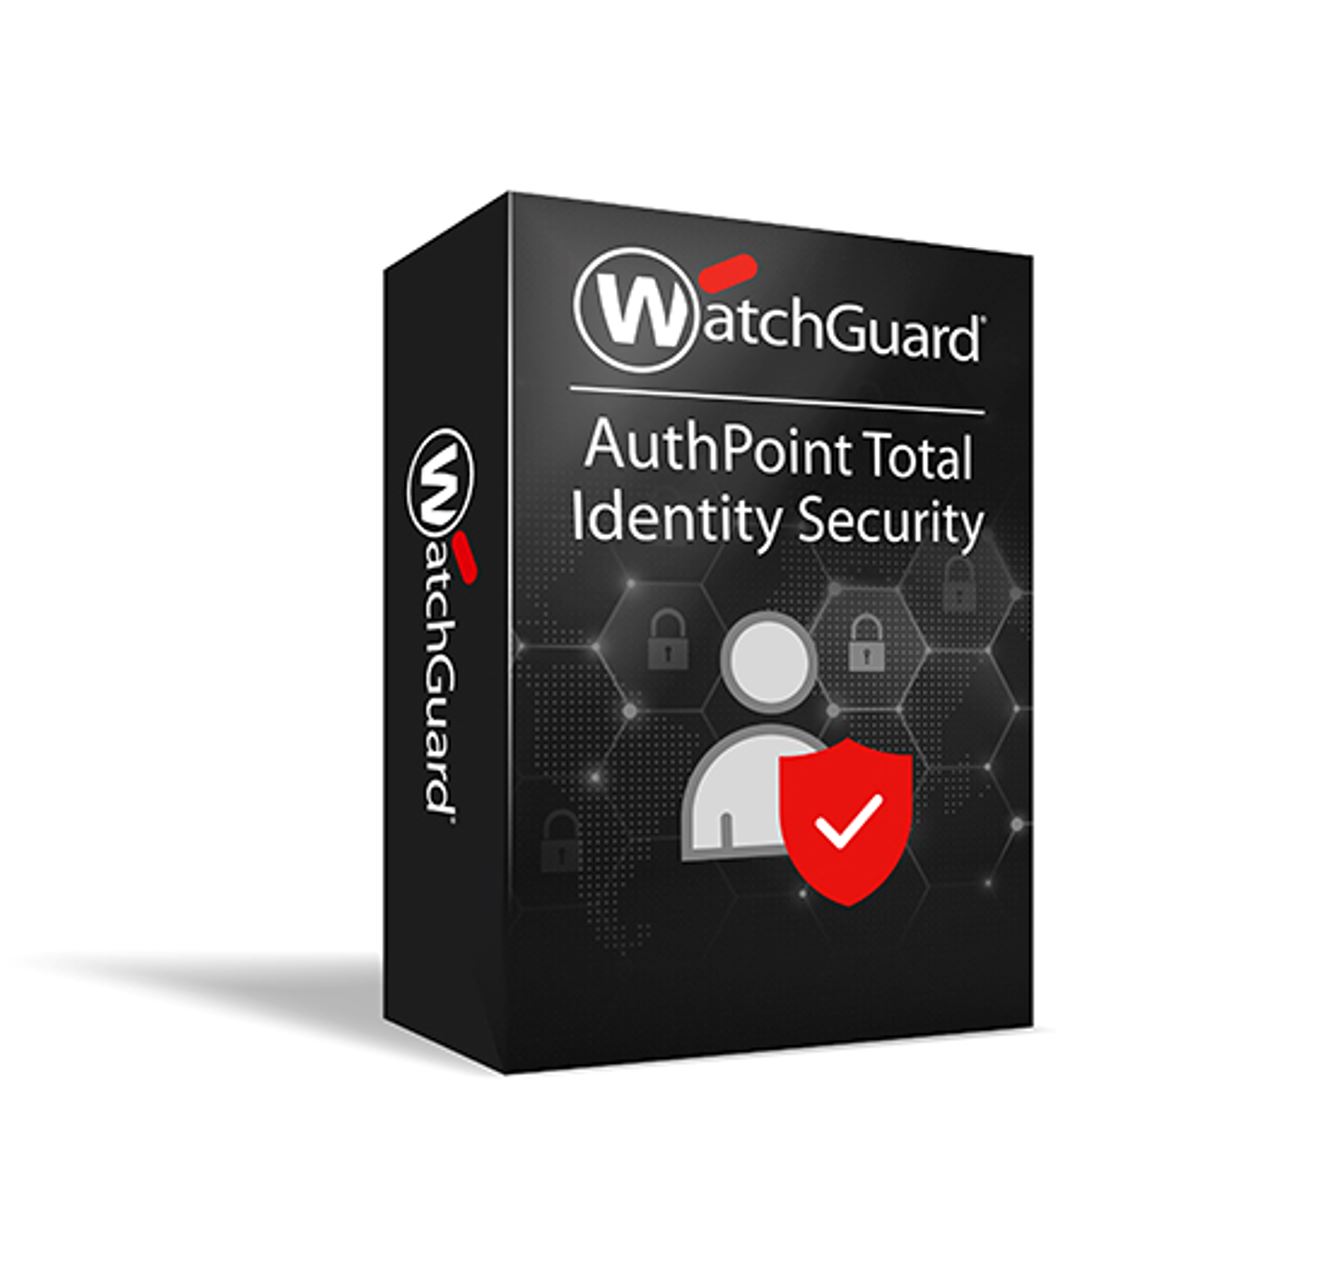 WatchGuard AuthPoint Total Identity Security  3 Year  251 to 500 users